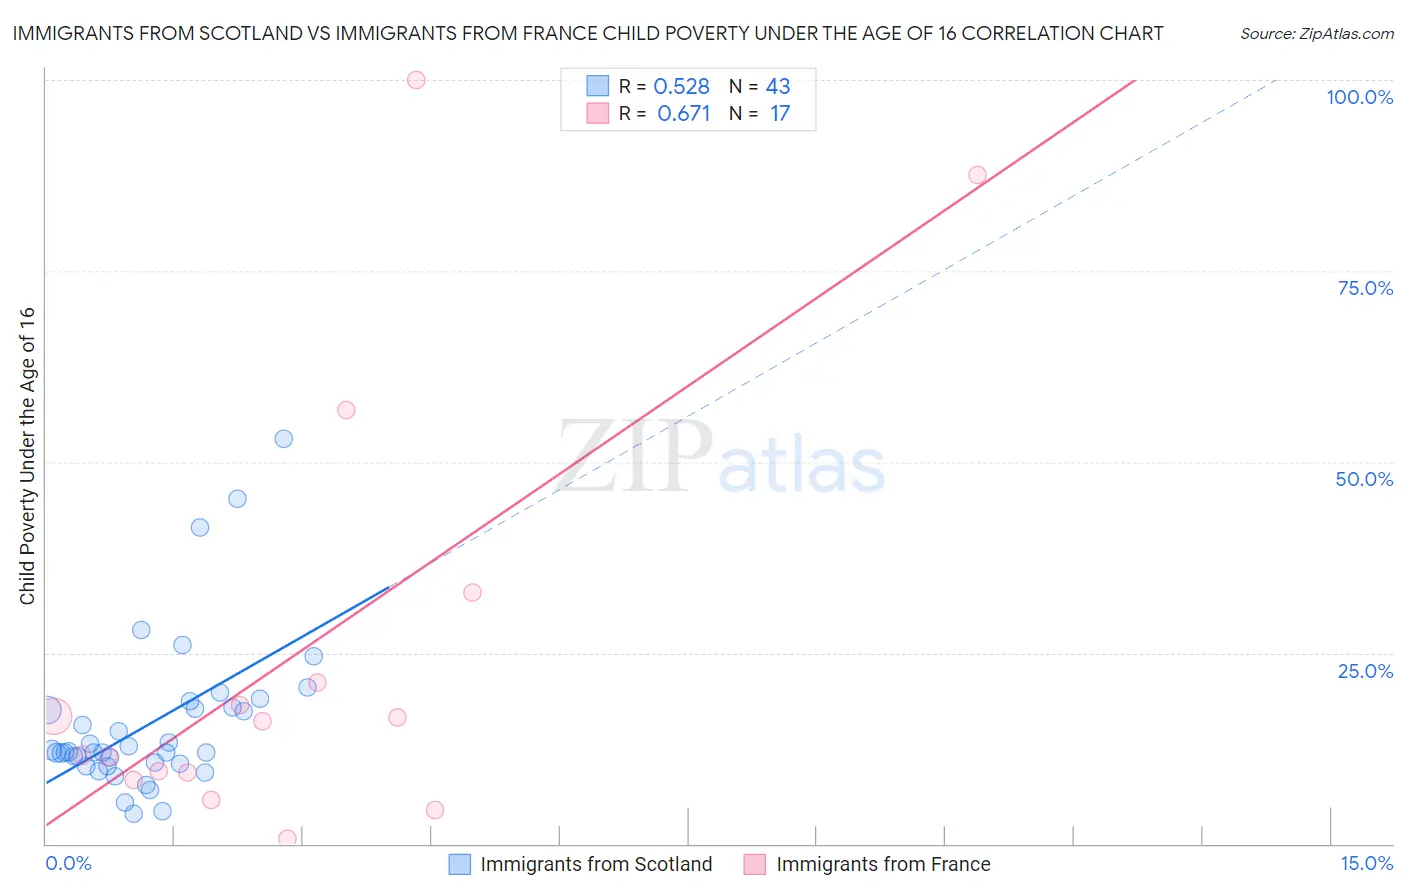 Immigrants from Scotland vs Immigrants from France Child Poverty Under the Age of 16